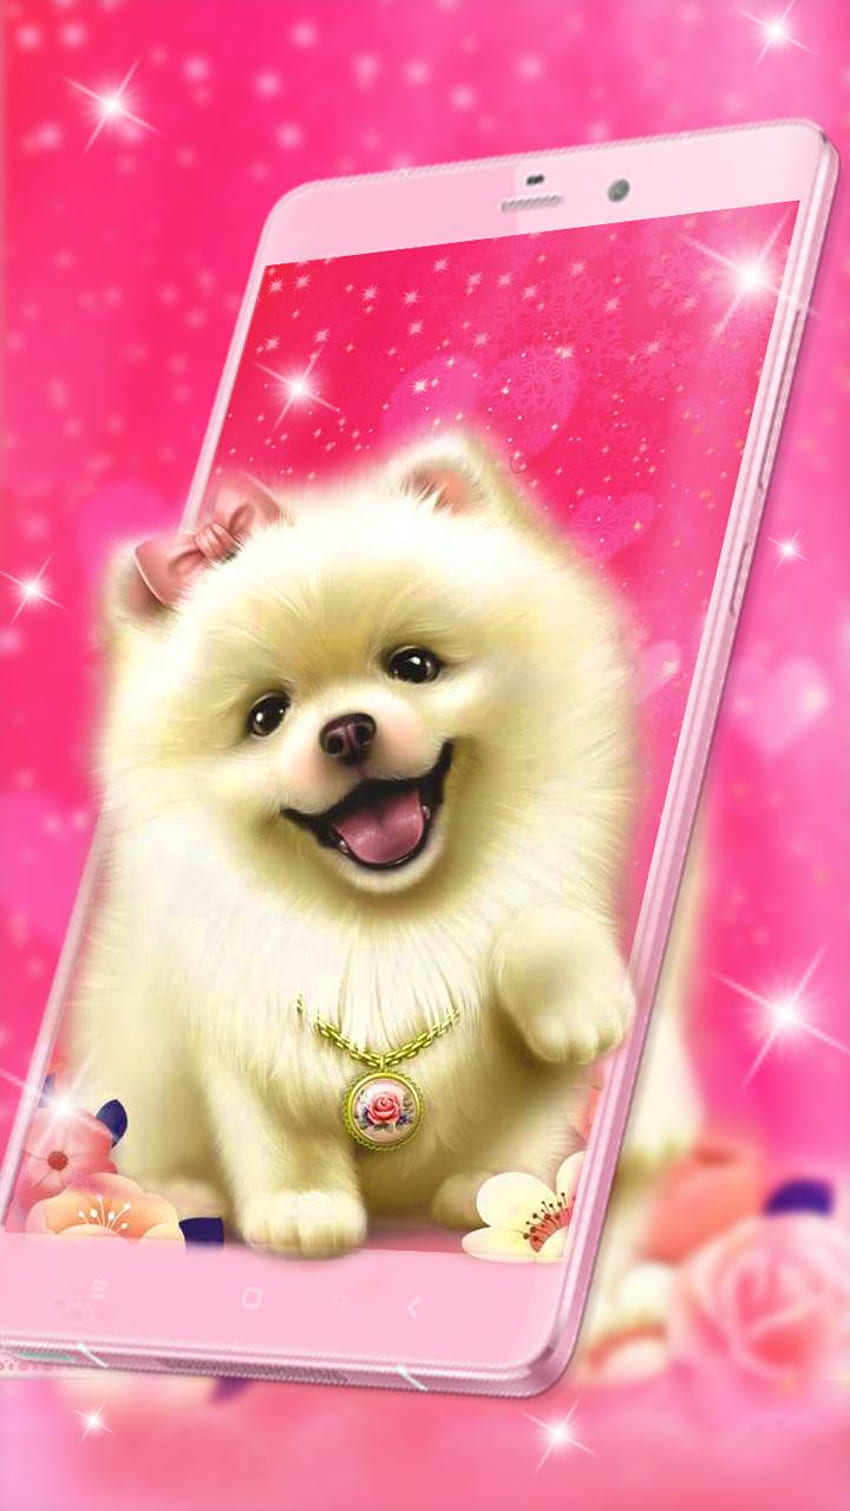 Cute Fluffy Puppy Android용 라이브, Cute Fluffy Dogs HD 전화 배경 화면